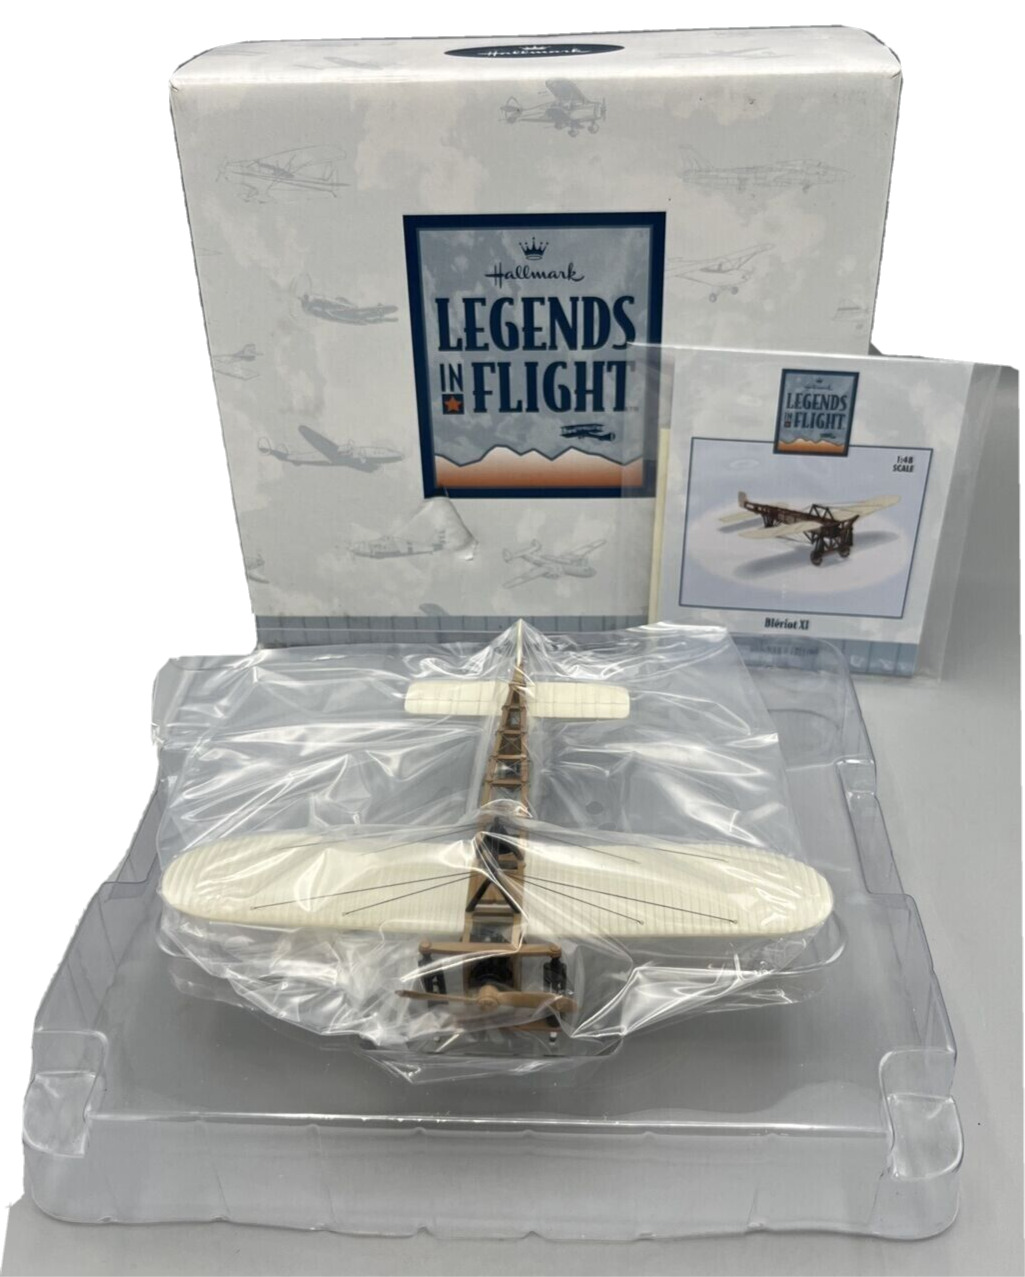 HALLMARK LEGENDS IN FLIGHT BLERIOT XI Airplane Numbered Edition New in Box